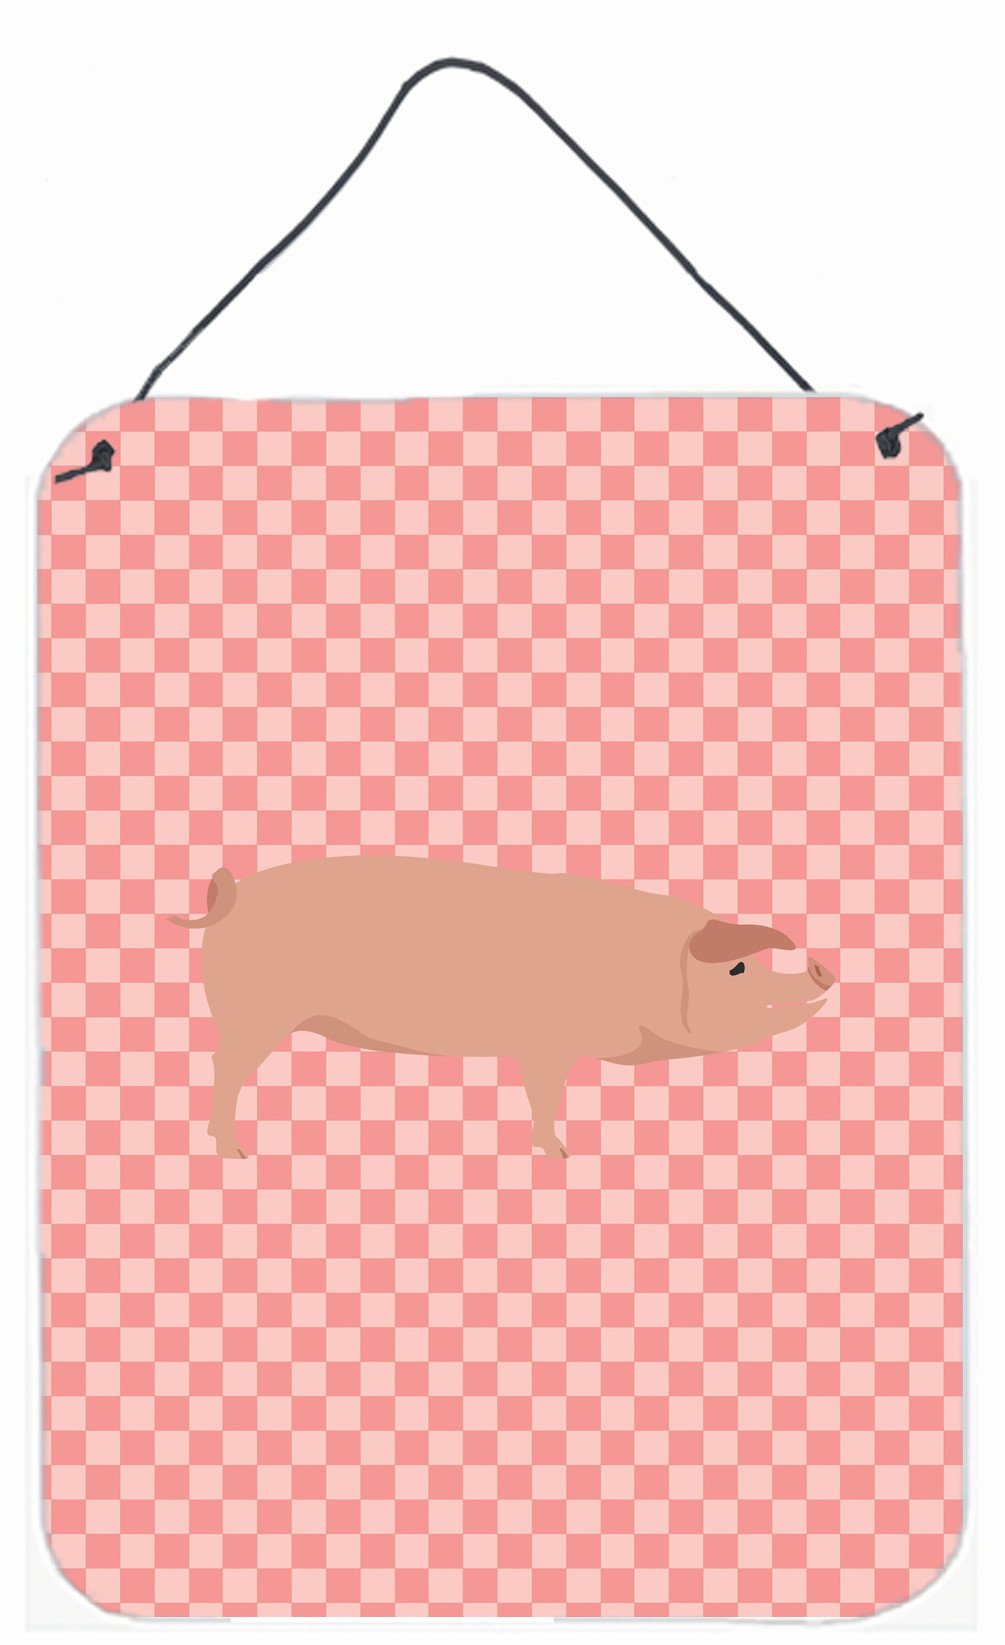 American Landrace Pig Pink Check Wall or Door Hanging Prints BB7932DS1216 by Caroline's Treasures